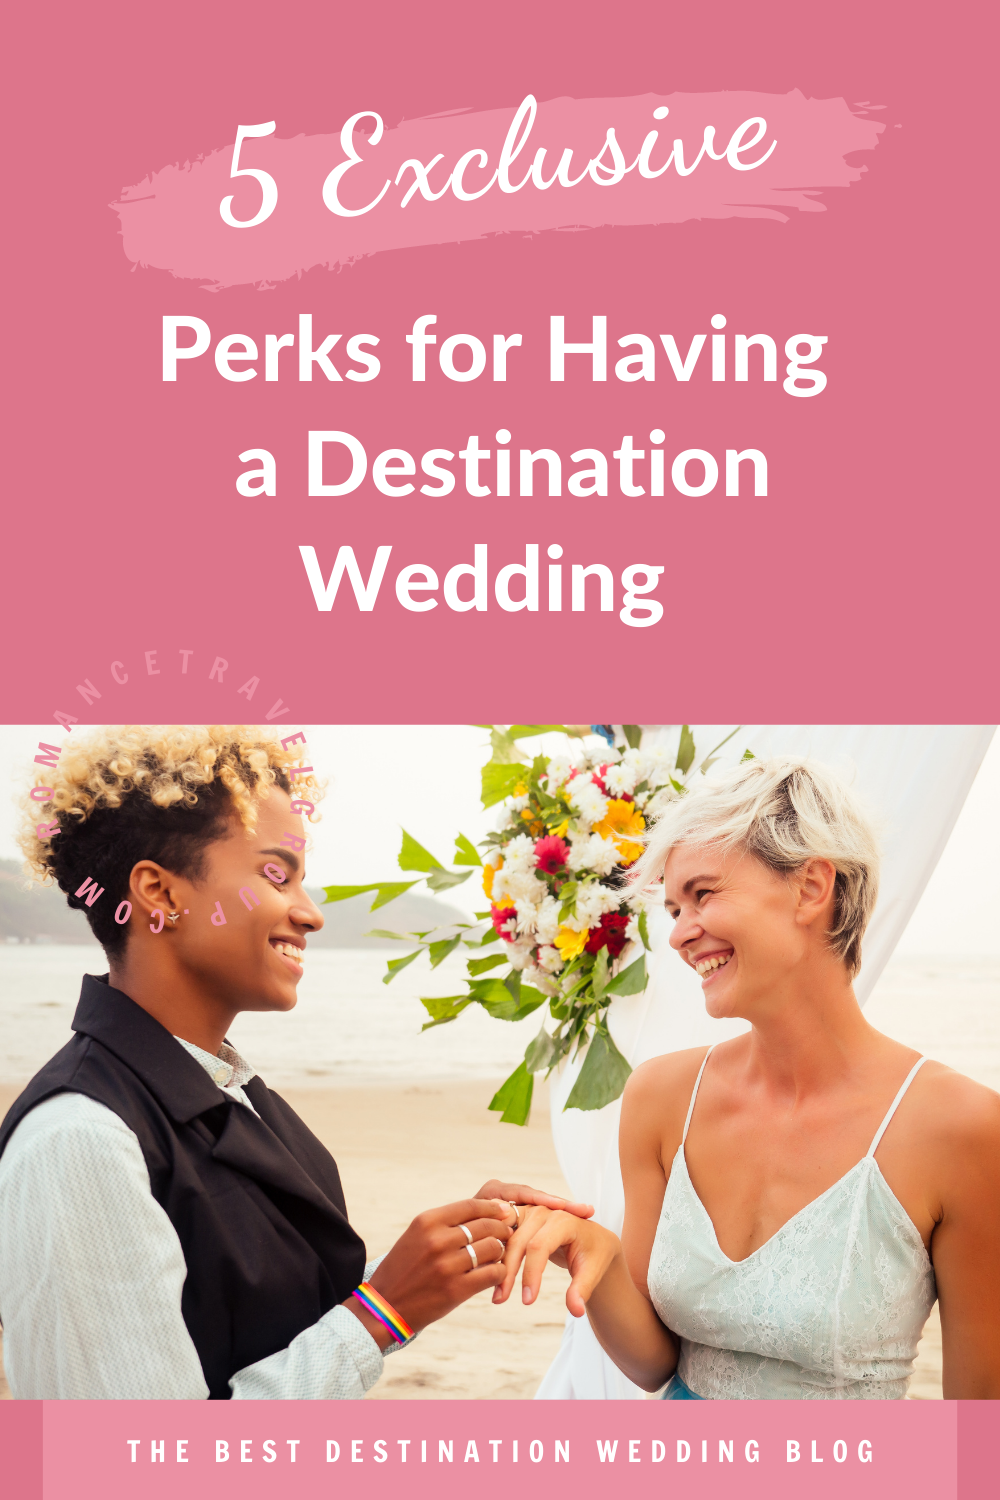 Exclusive Perks for Having a Destination Wedding